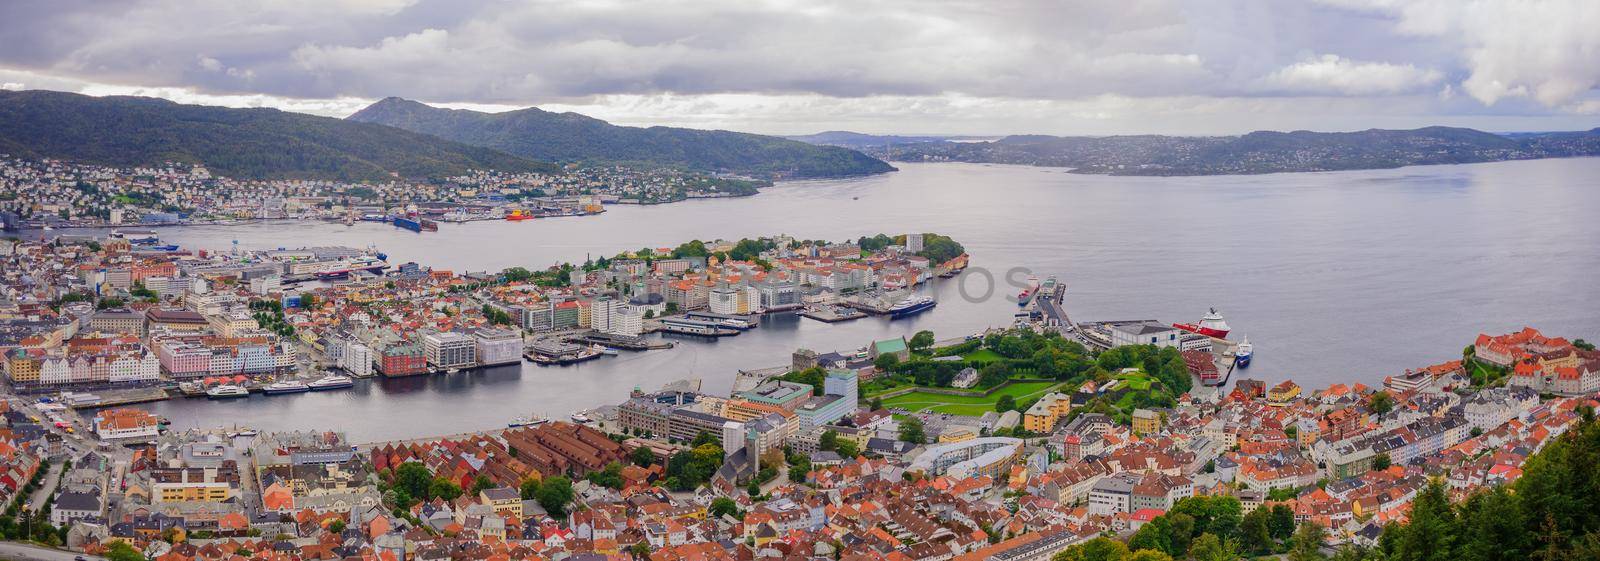 Panoramic views of the old city of Bergen and nearby fjords. Norway